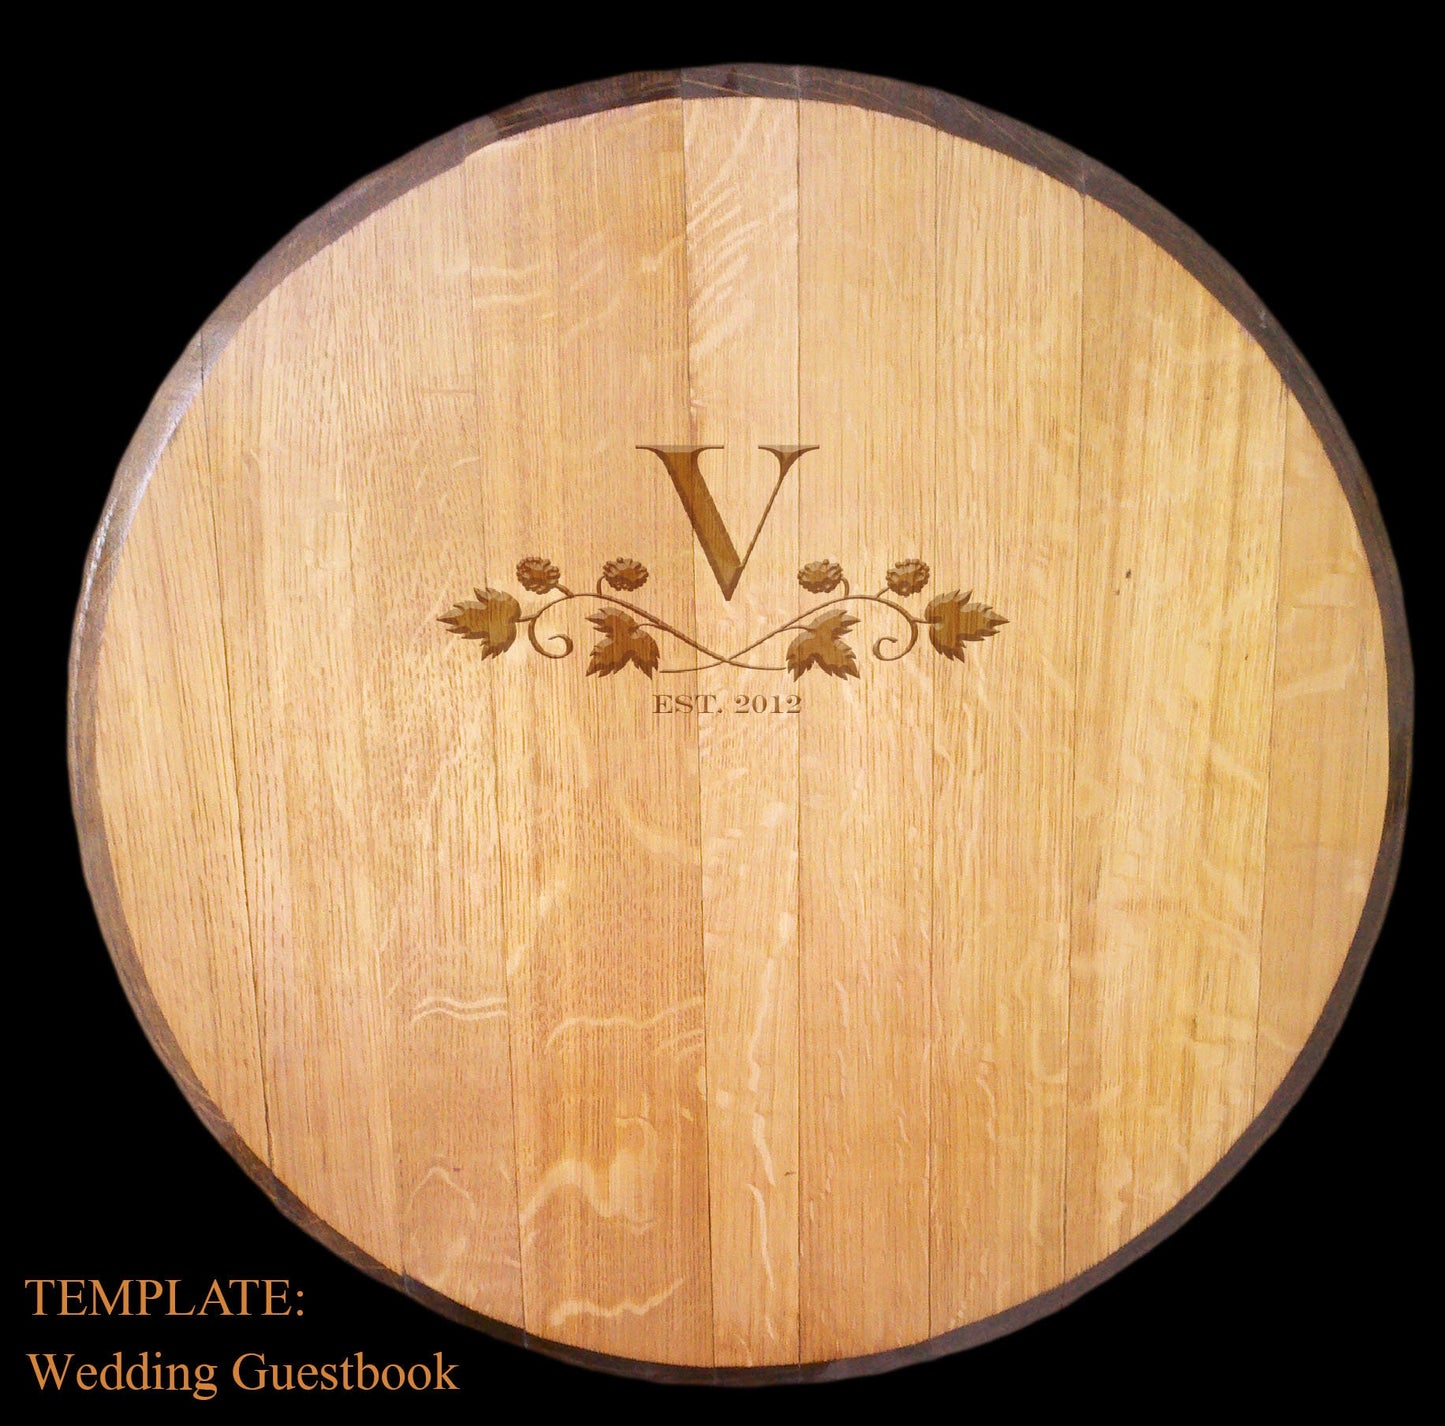 Wine Barrel Personalized Wal Art or Wedding Guestbook - Signo - made from Napa wine barrel head with custom engraving